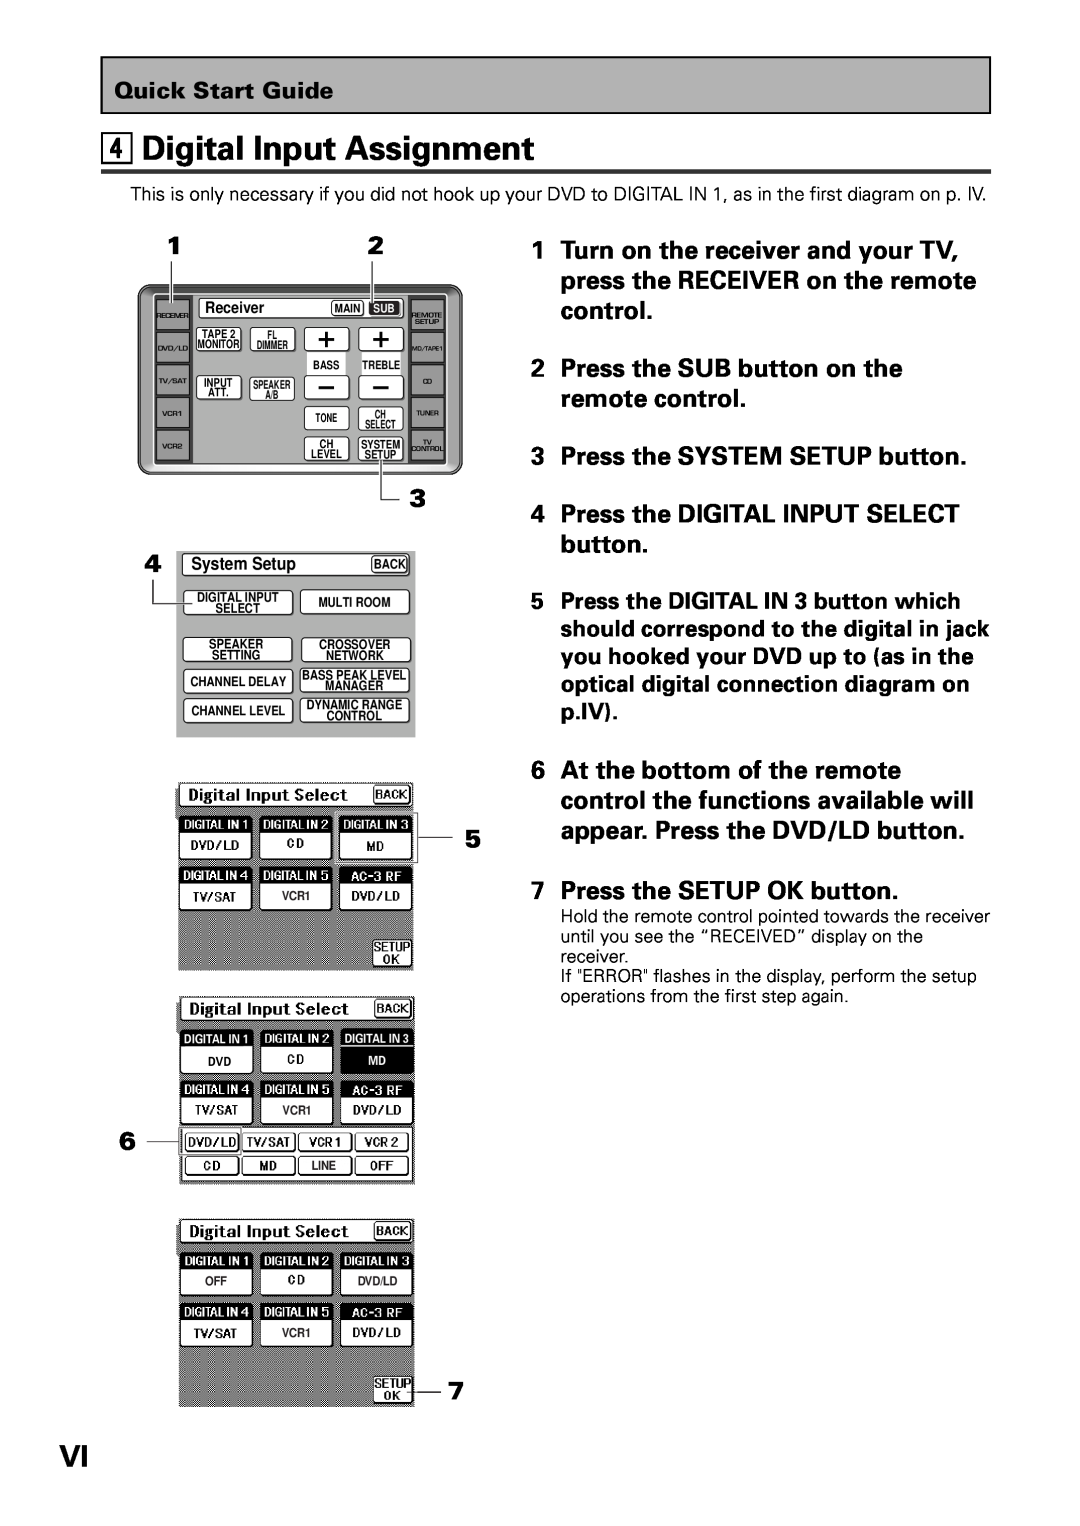 Pioneer VSX-39TX 4Digital Input Assignment, 2Press the SUB button on the remote control, 3Press the SYSTEM SETUP button 